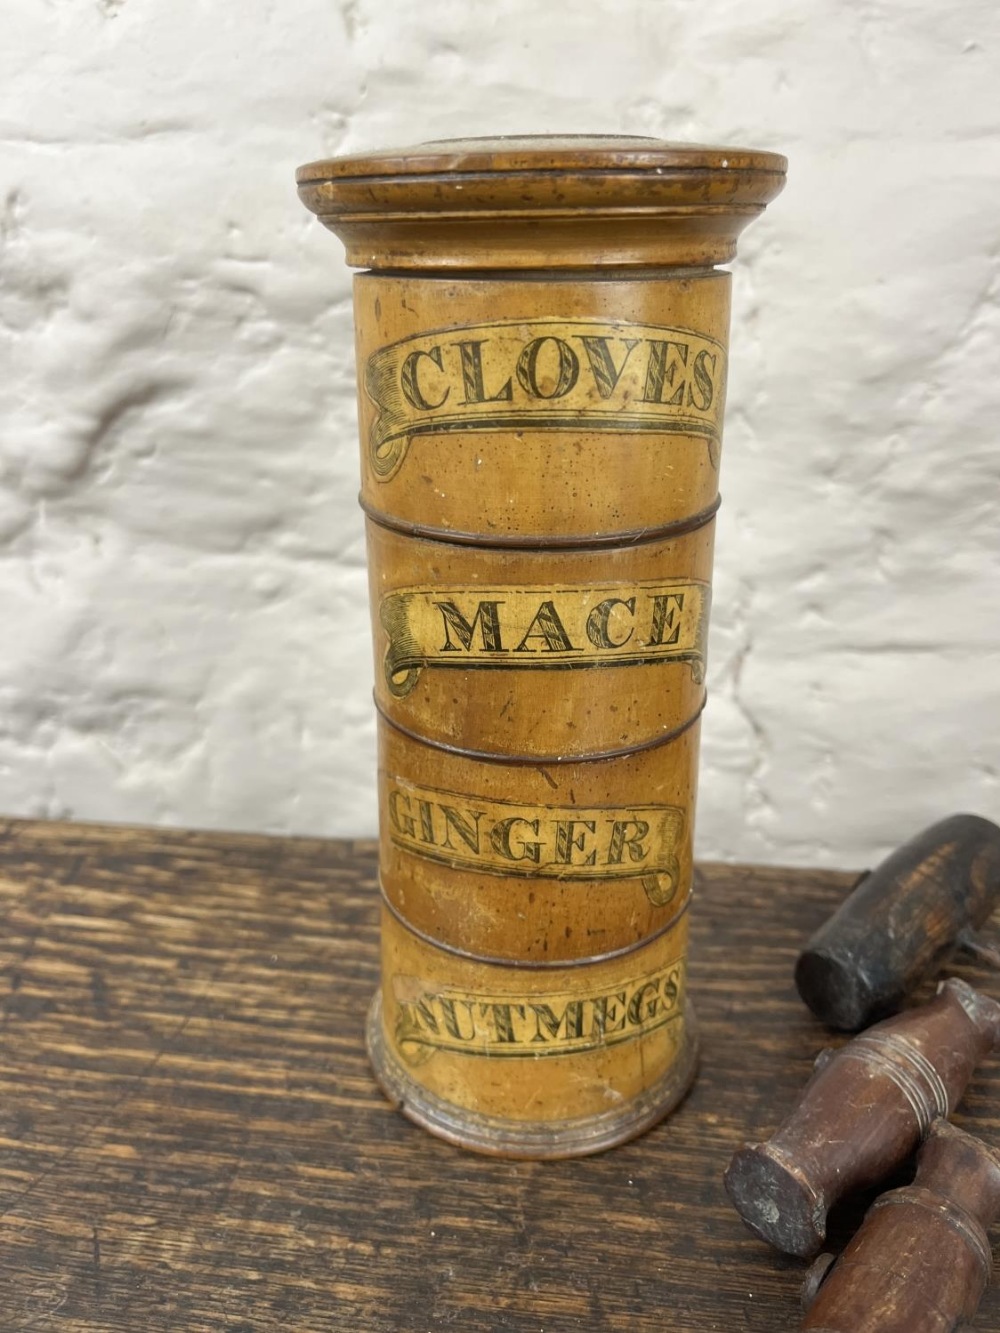 C19th treen spice tower, four tiers with paper labels for Cloves, Mace, Ginger and Nutmegs, H20cm, - Image 2 of 3